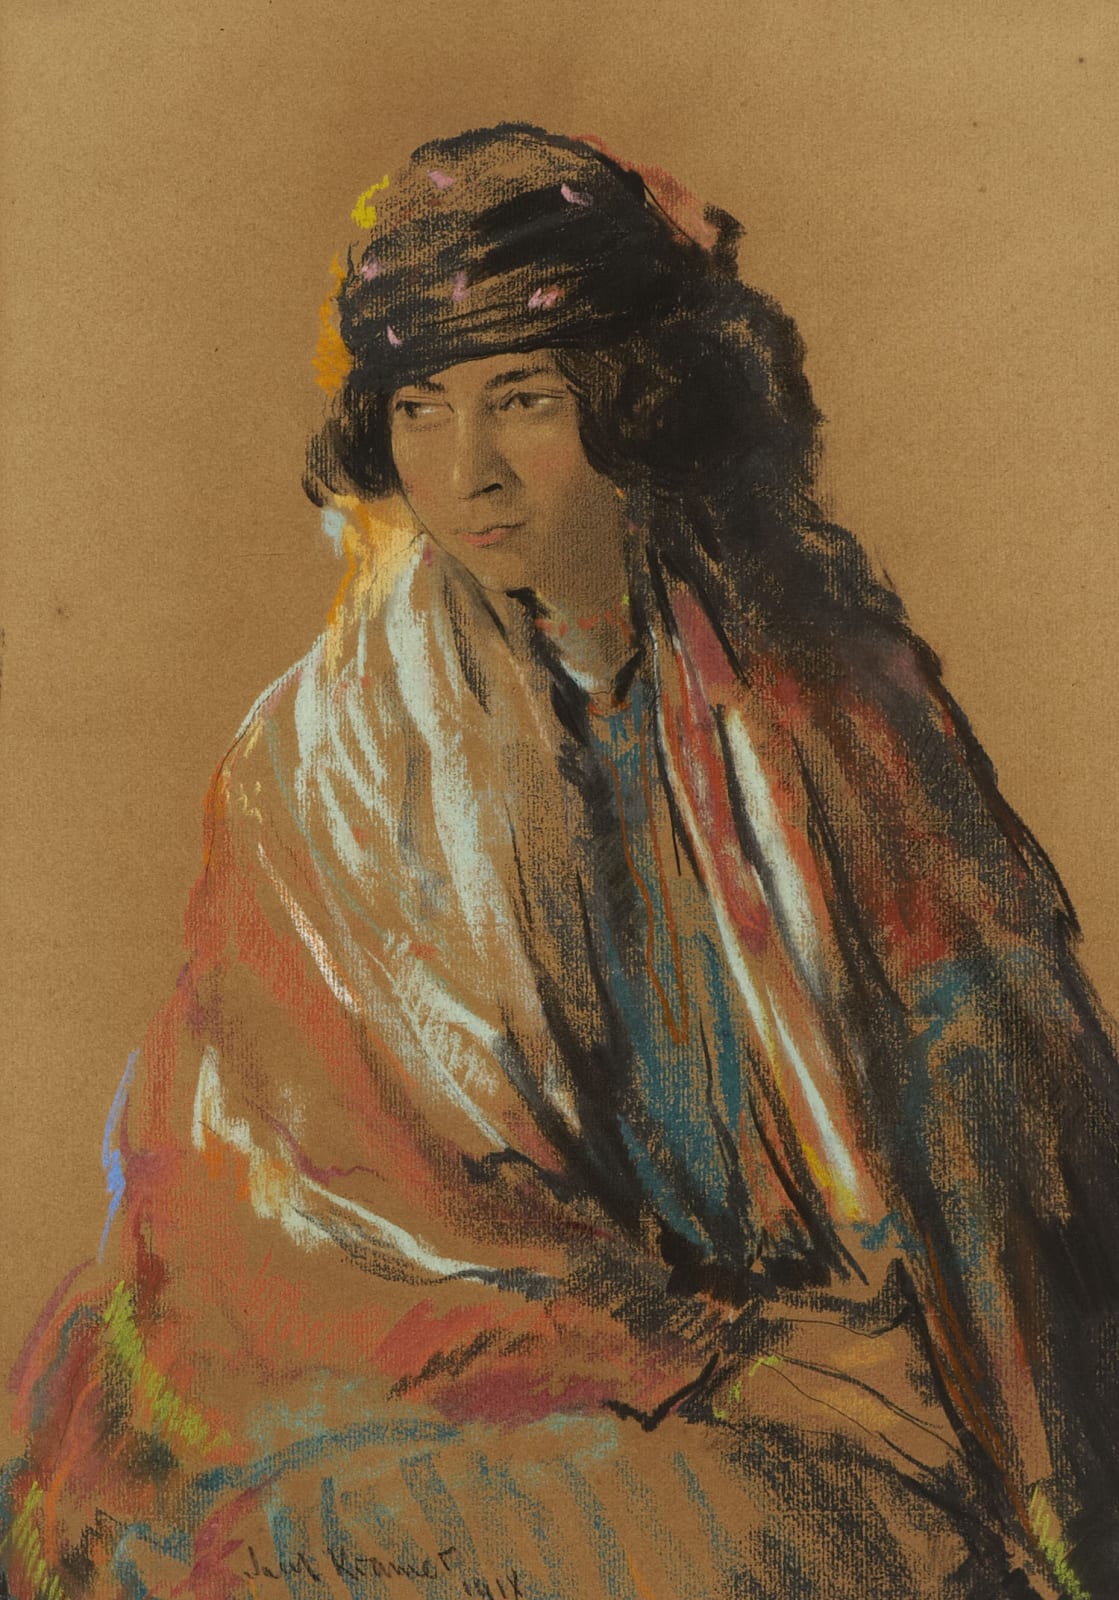 Jacob Kramer (1892-1962) Portrait of a Gypsy c.1917 Pastel and chalk on paper 44 x 31 cm Ben Uri Collection © Jacob Kramer estate To see and discover more about this artist click here